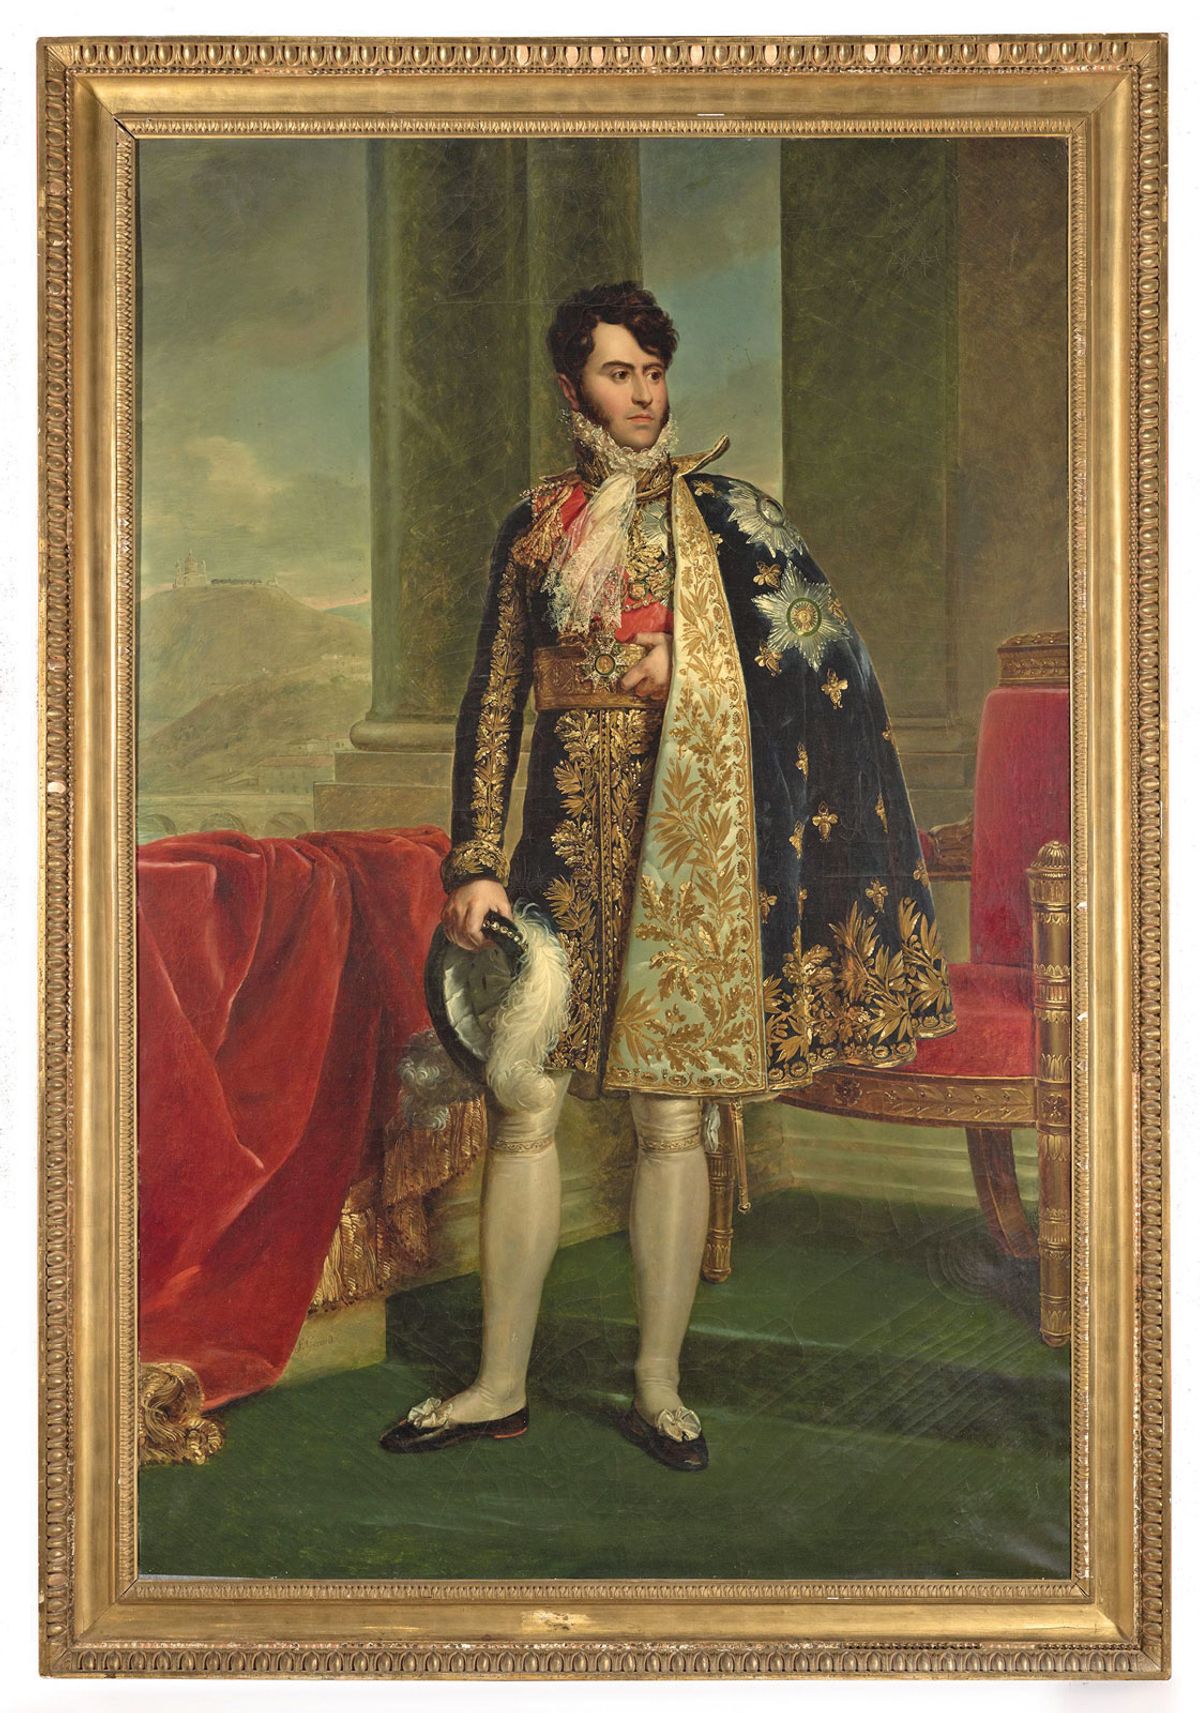 The seven-foot-tall portrait, still in its original frame, is said to be in pristine condition © The Frick Collection, New York